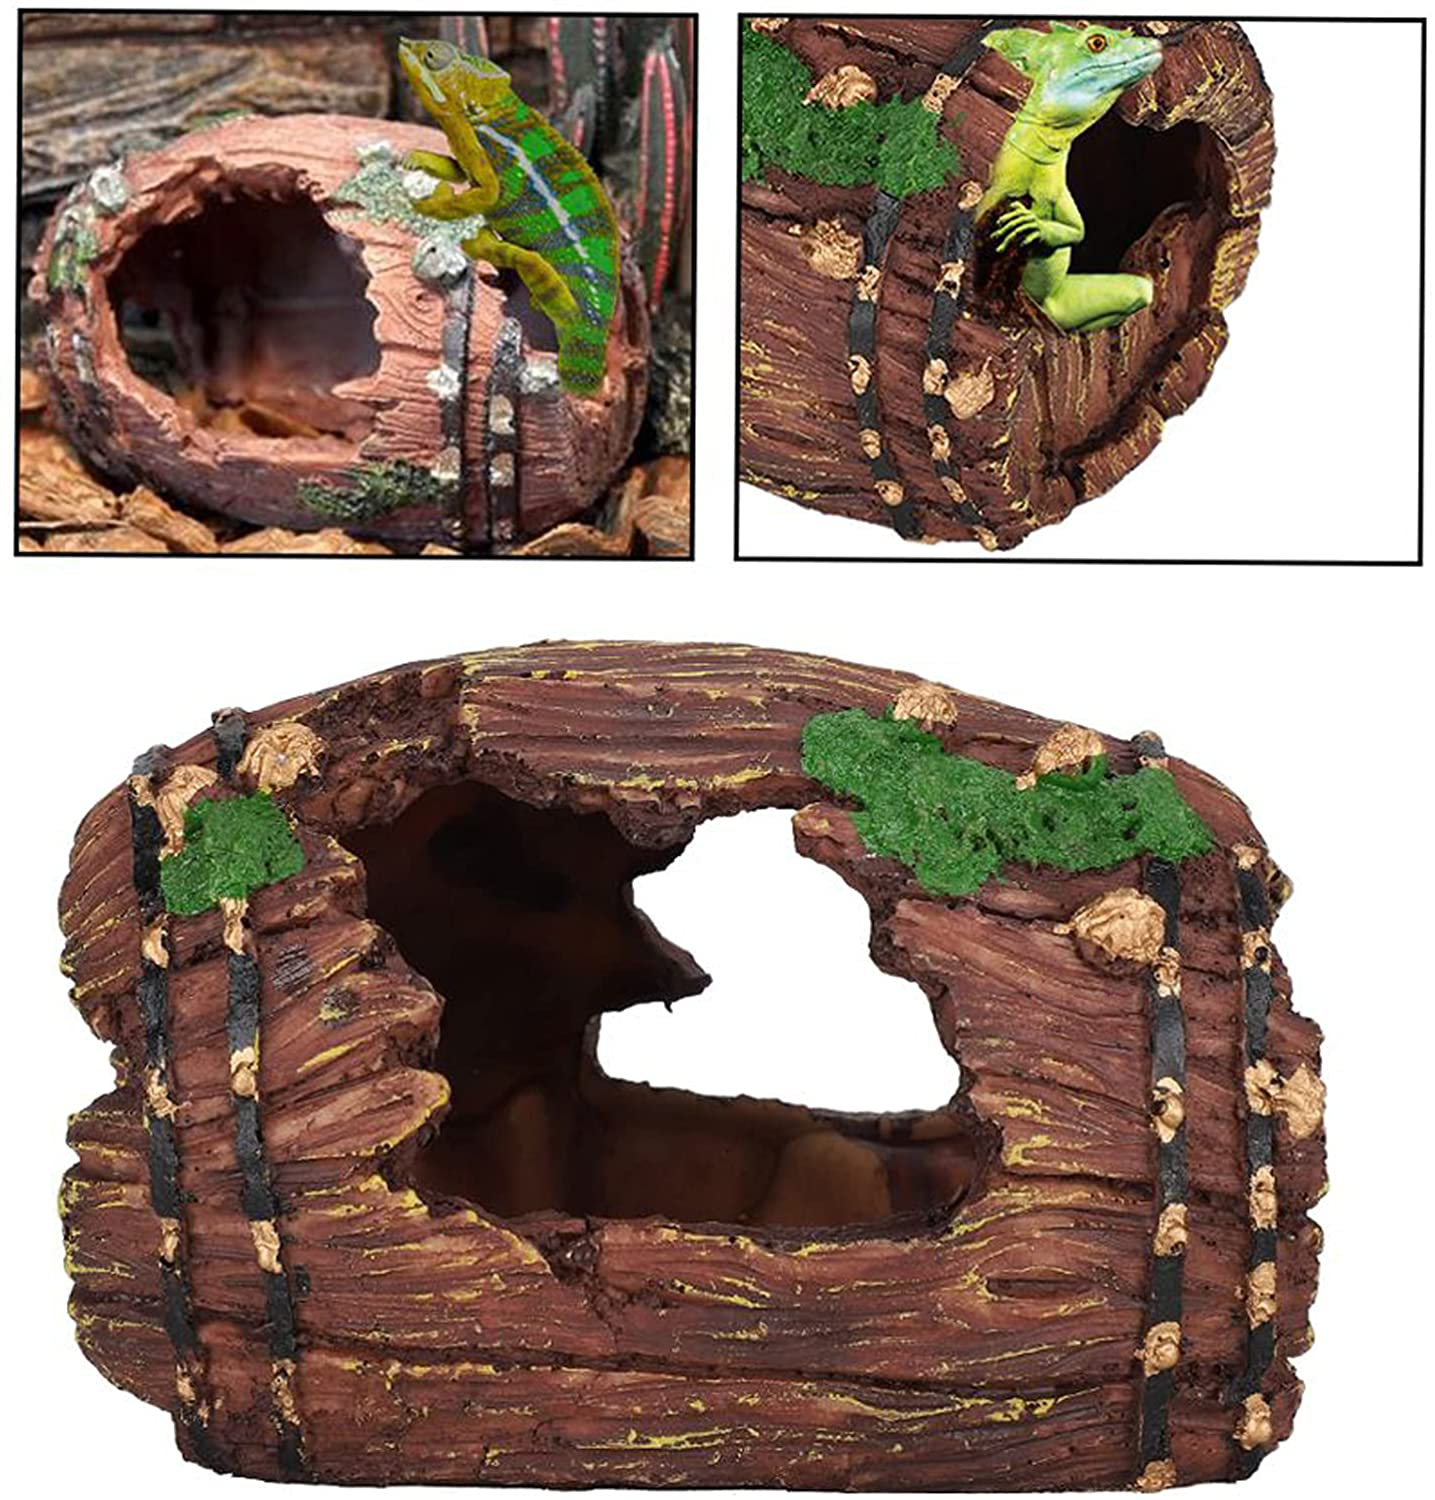 HERCOCCI Leopard Gecko Tank Accessories, Coconut Shell Hideout Cave Reptile Climbing Vine Habitat Decor with Hanging Reptile Plants for Chameleon Lizard Snake Hermit Crab Animals & Pet Supplies > Pet Supplies > Reptile & Amphibian Supplies > Reptile & Amphibian Habitats HERCOCCI   